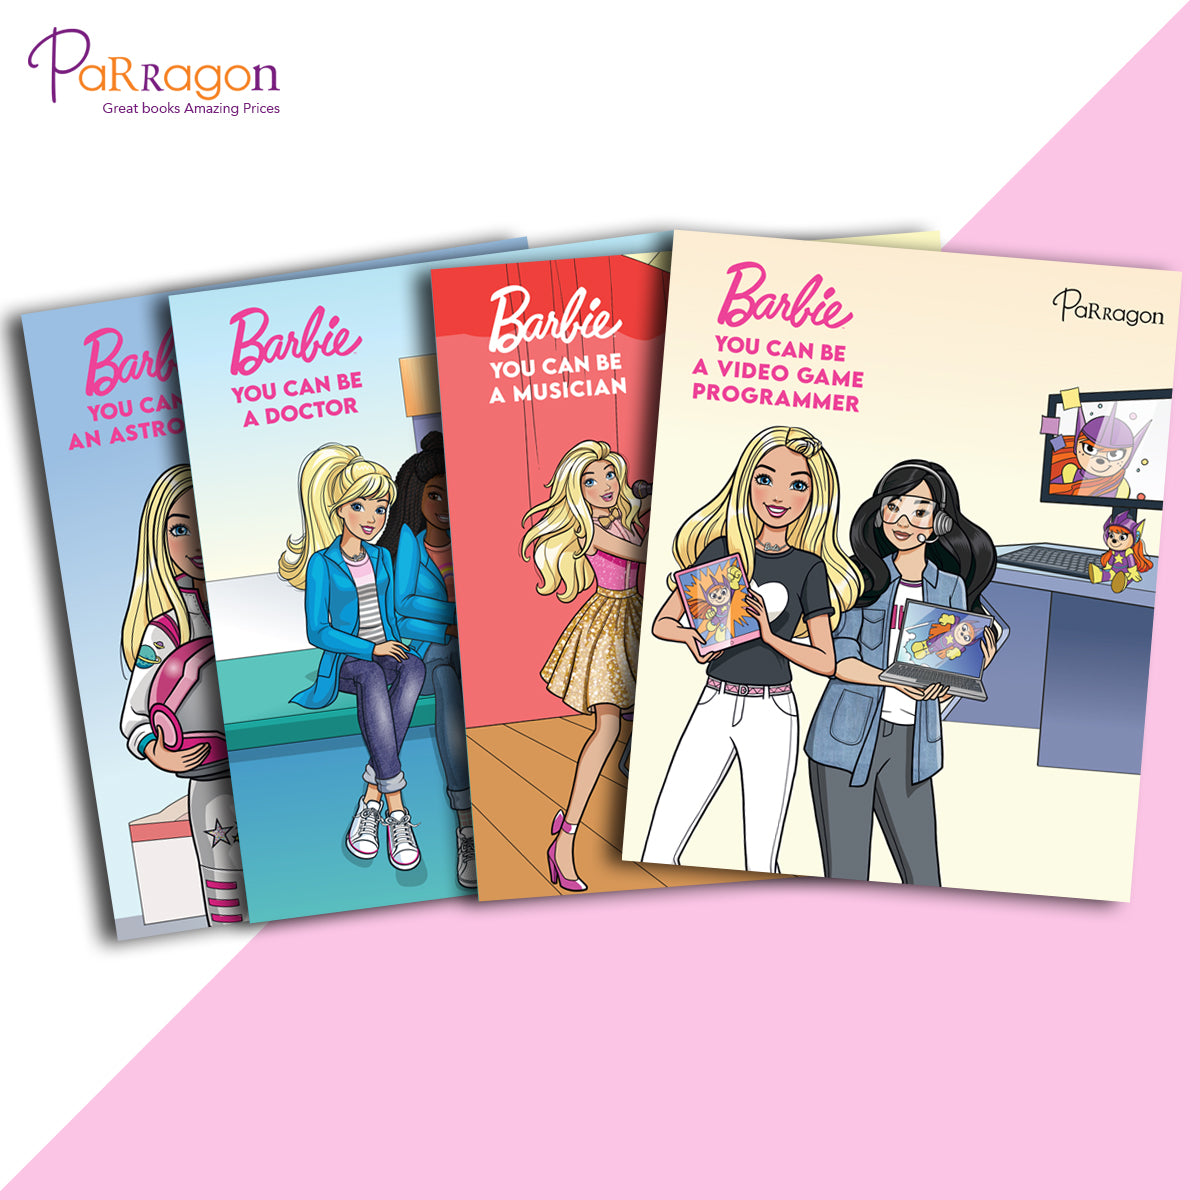 Barbie You Can be Series (Set of 4 Books)